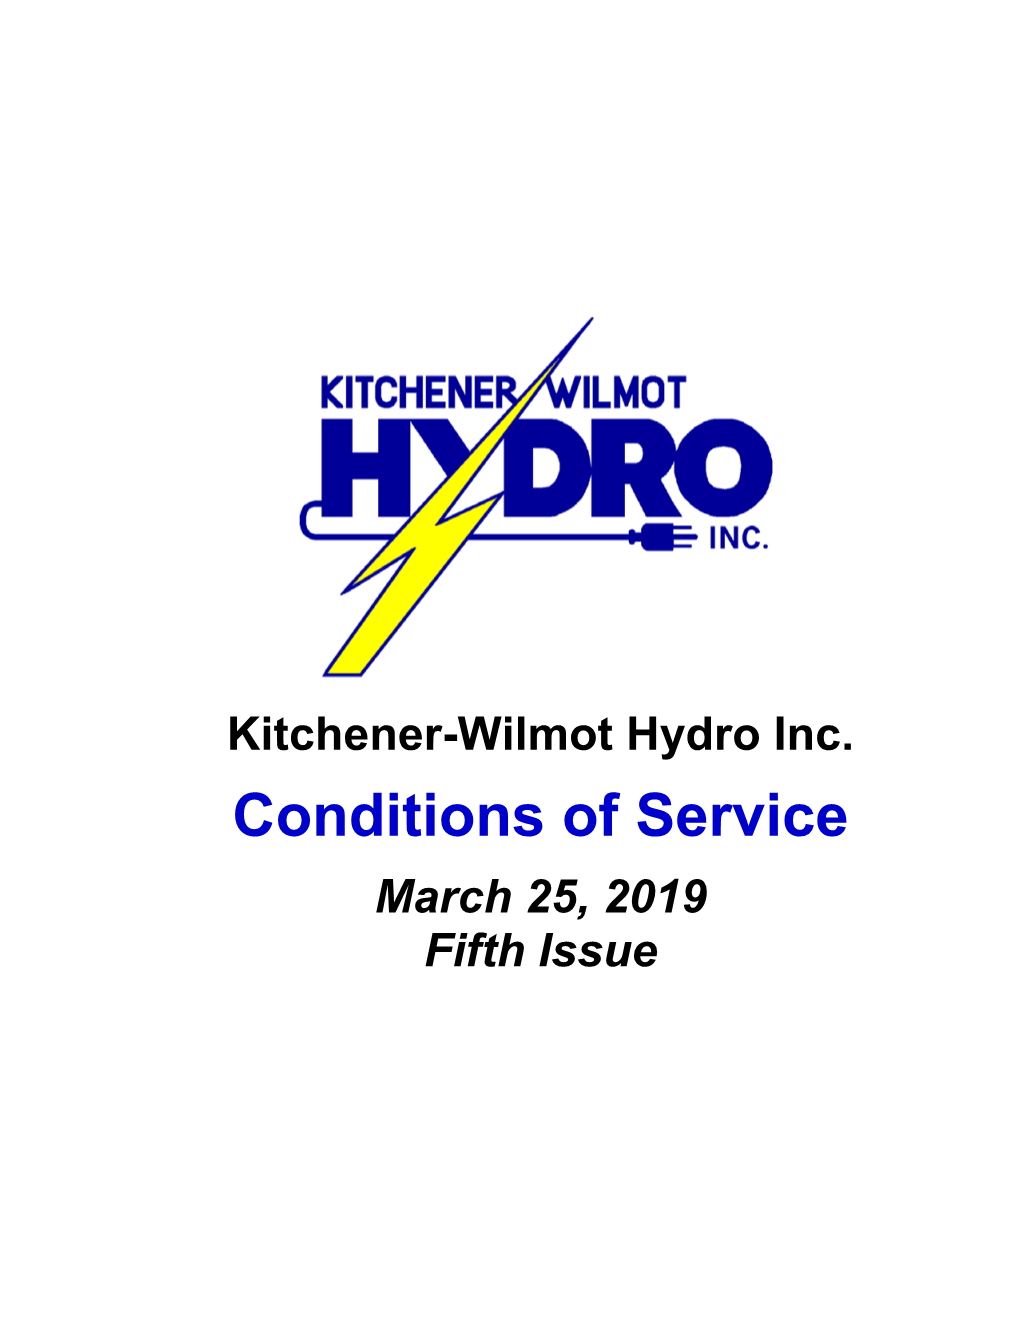 Kitchener-Wilmot Hydro Conditions of Service